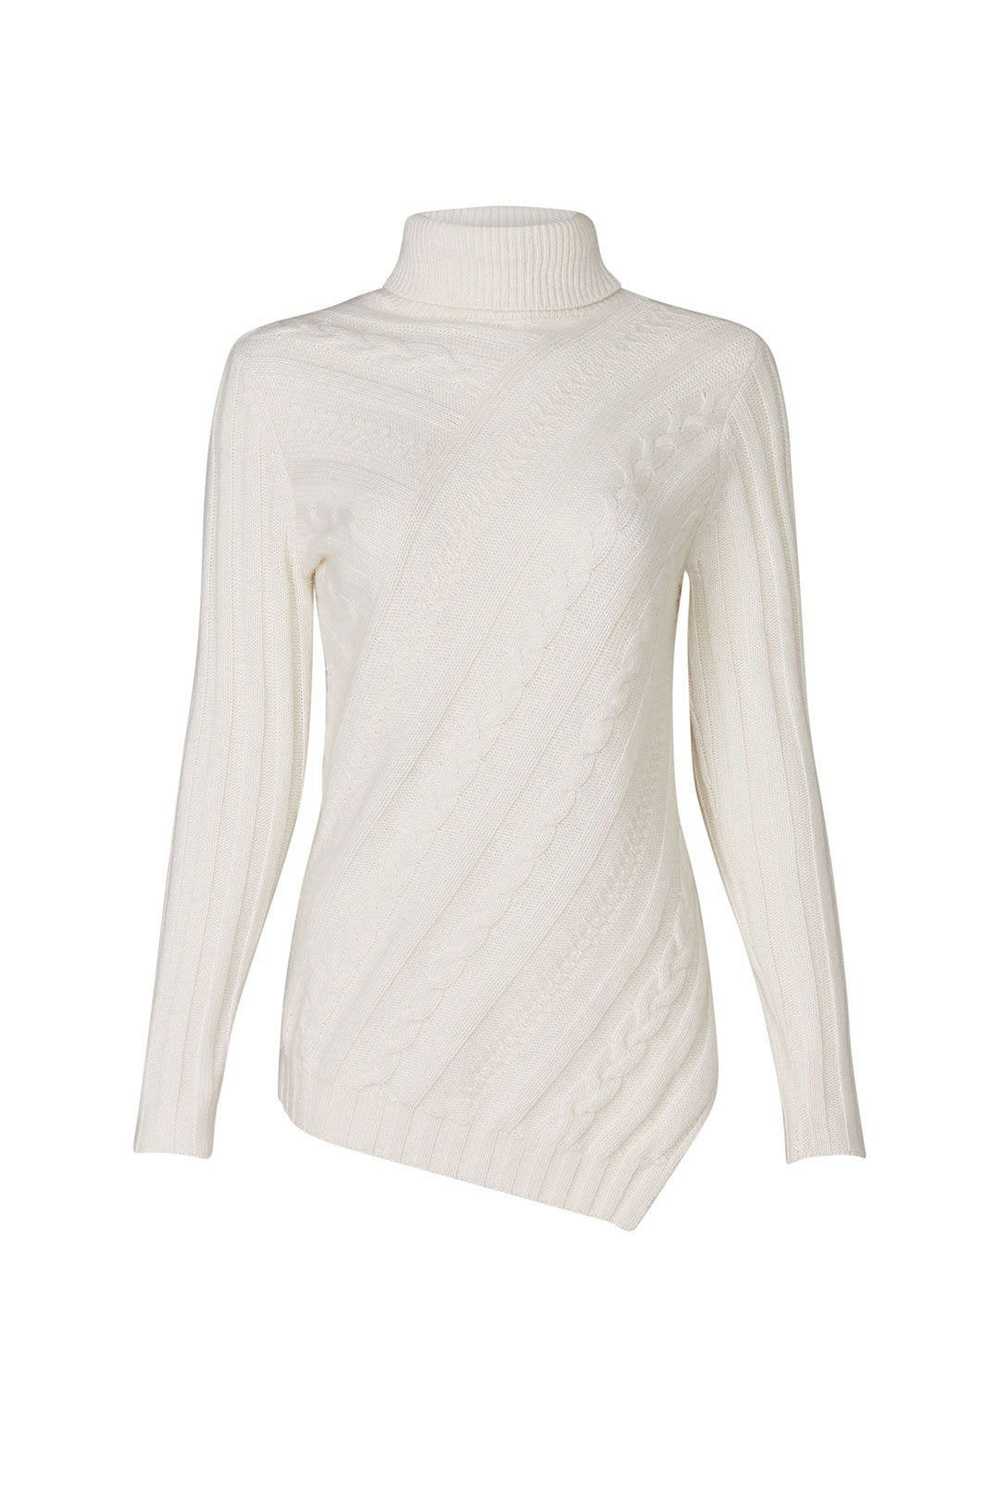 Milly Asymmetrical Cable Sweater - image 5